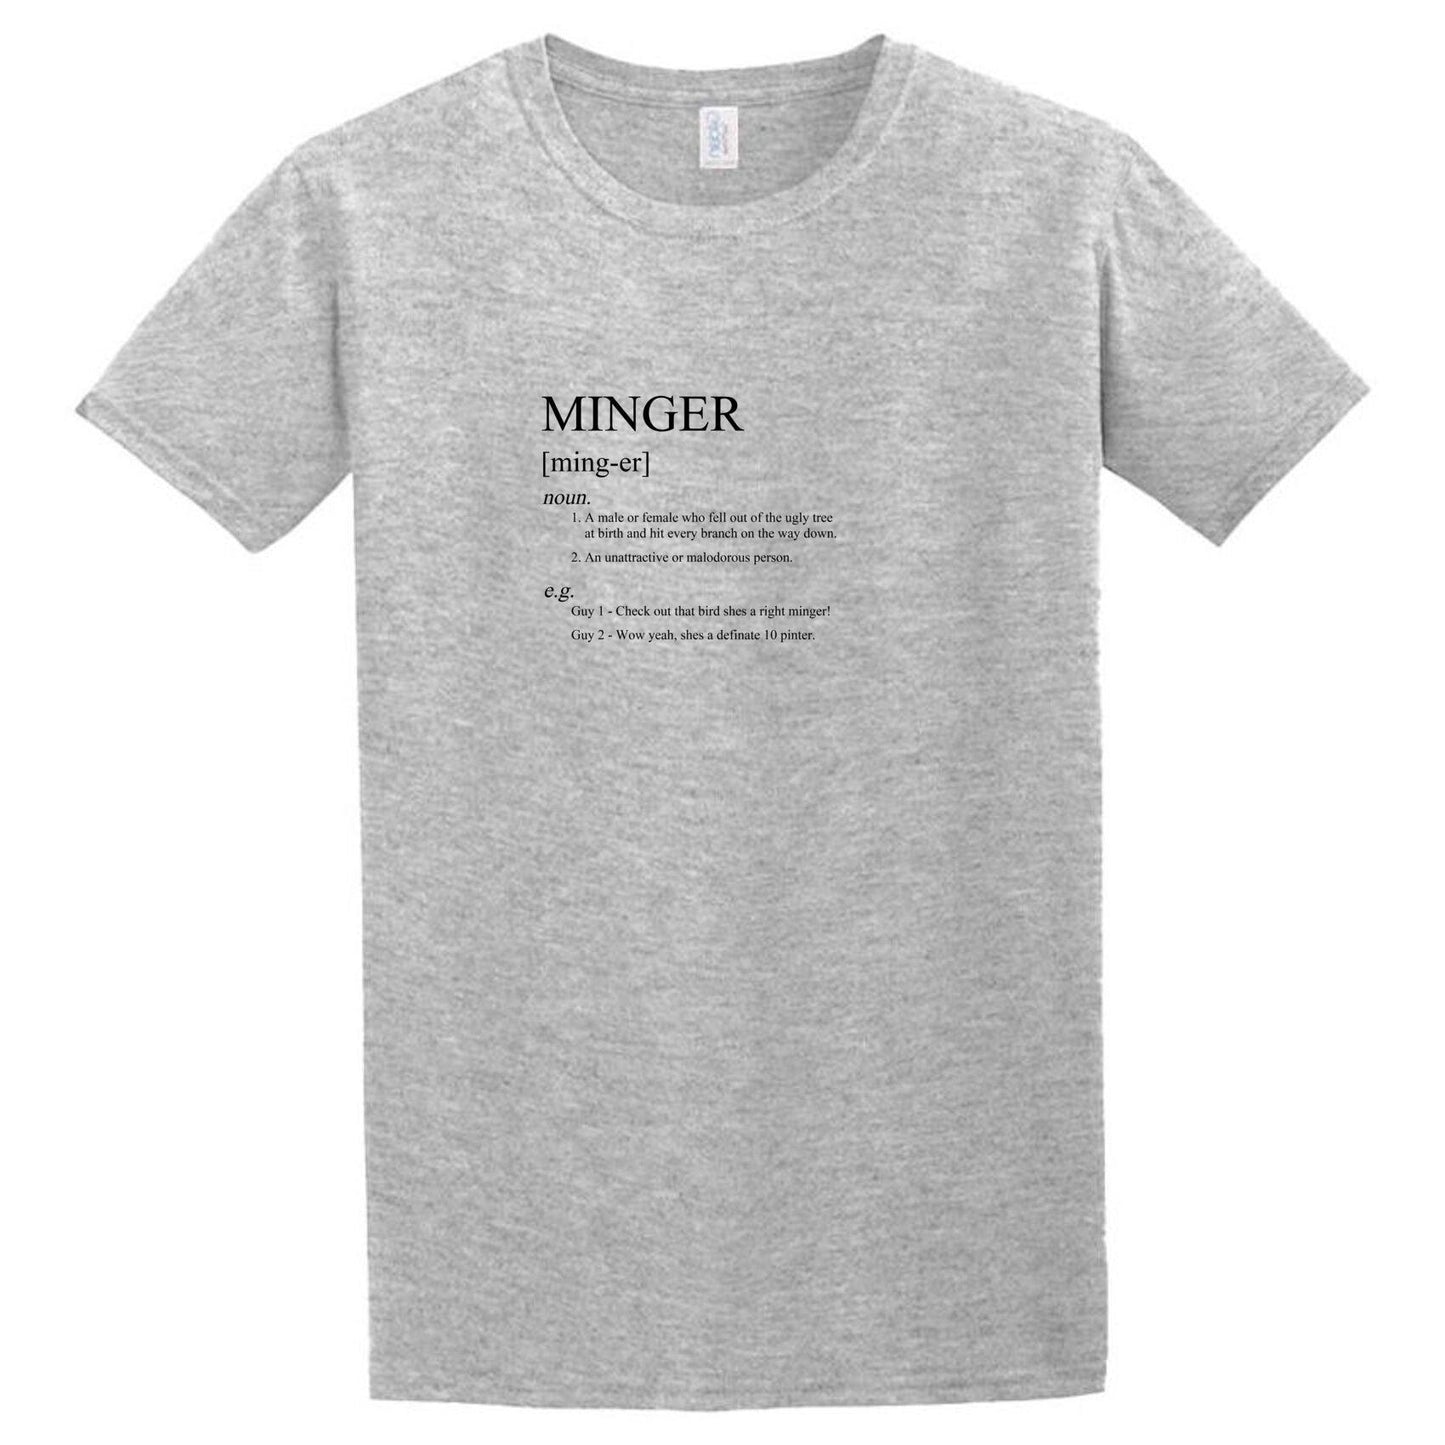 A gray Minger T-Shirt that says Twisted Gifts.